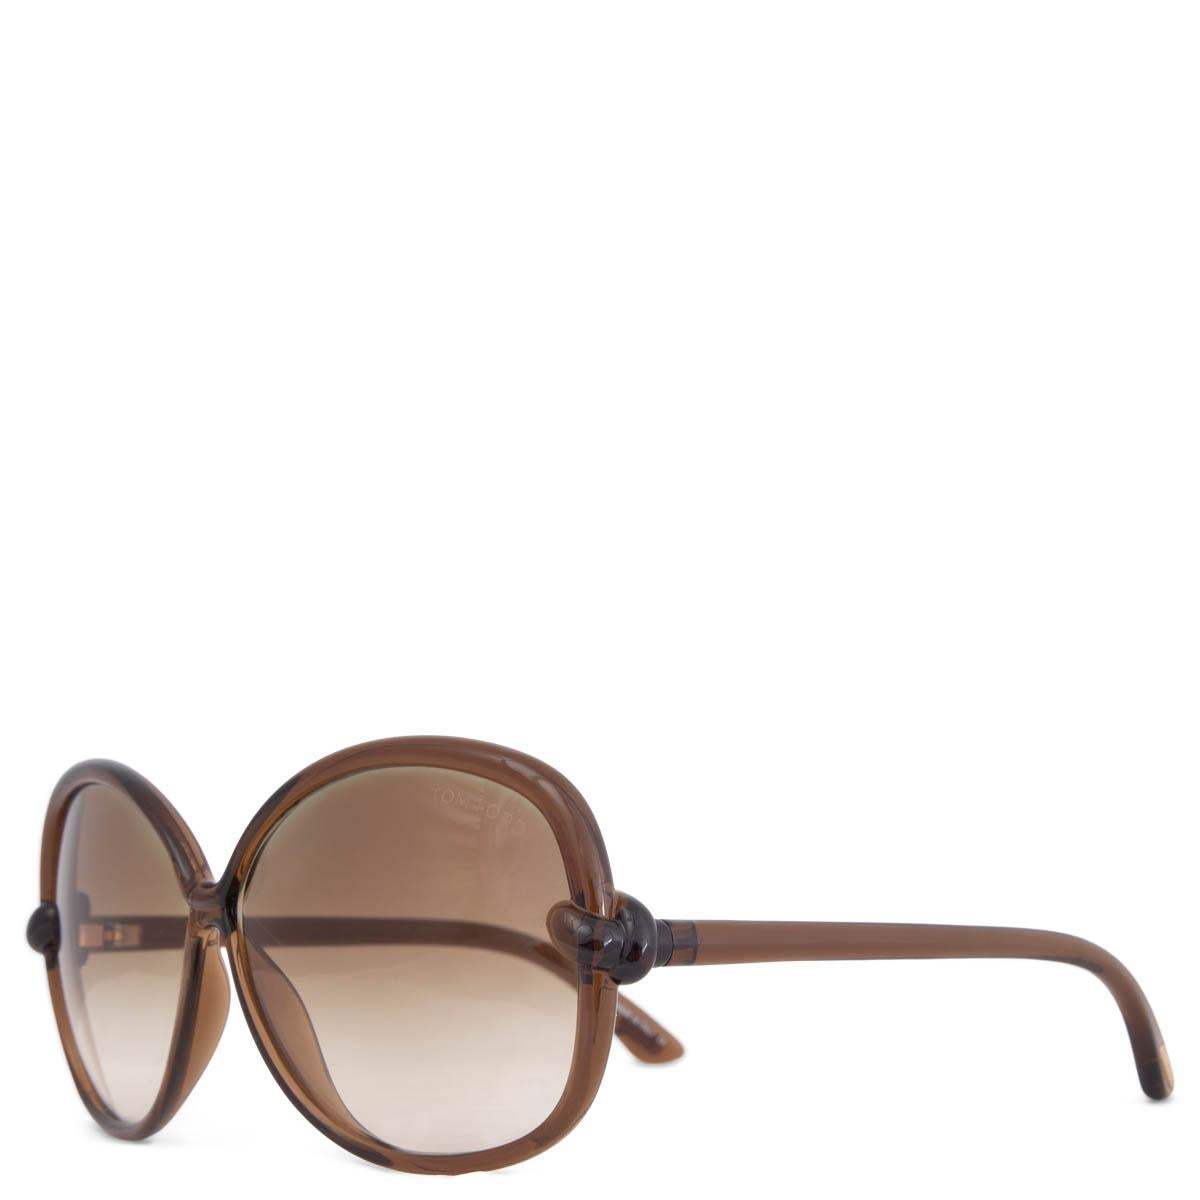 100% authentic Tom Ford Ingrid TF163 oval sunglasses in light brown acetate with brown gradient lenses. Have been worn and show some faint scratches. Overall in very good condition. Comes with case. 

Measurements
Model	TF163 48F
Width	15cm